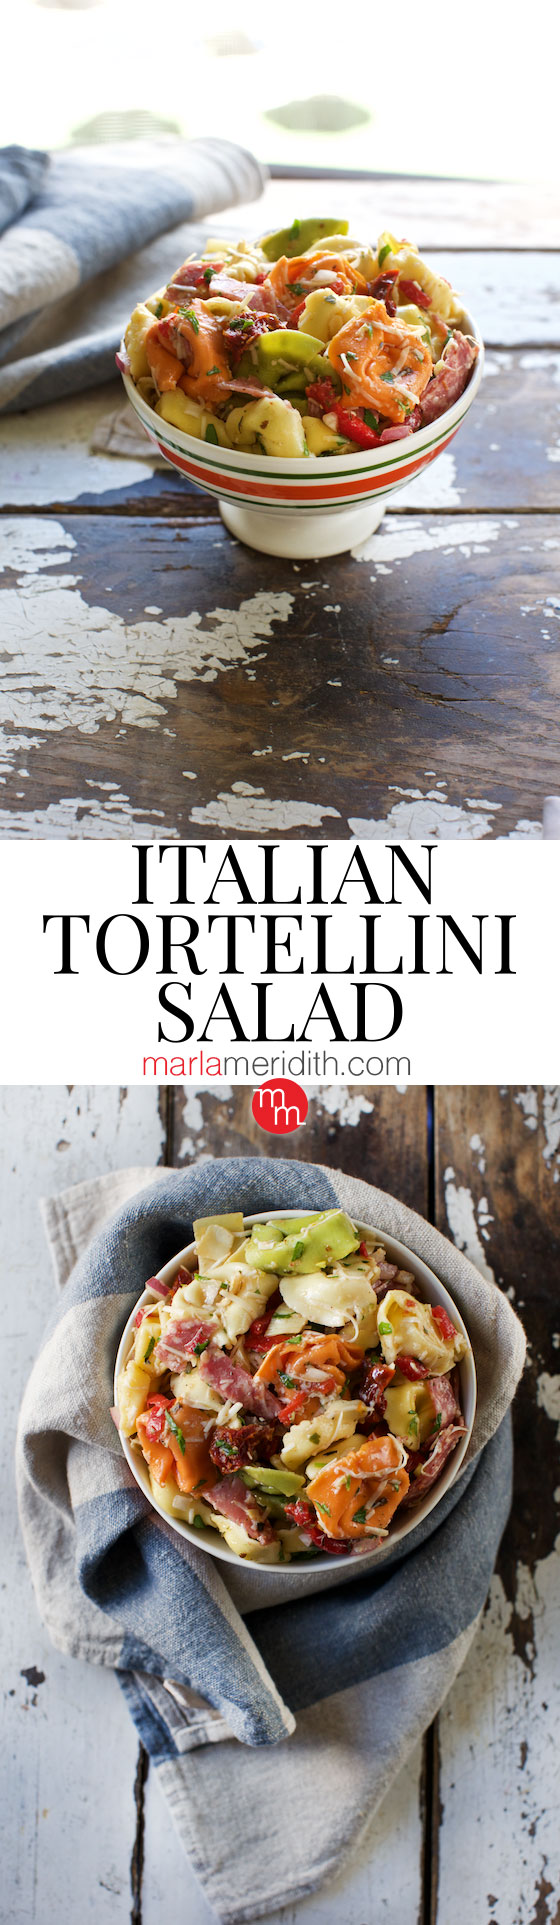 Italian Tortellini Salad recipe. Delicious for family meals and summer entertaining. MarlaMeridith.com ( @marlameridith )